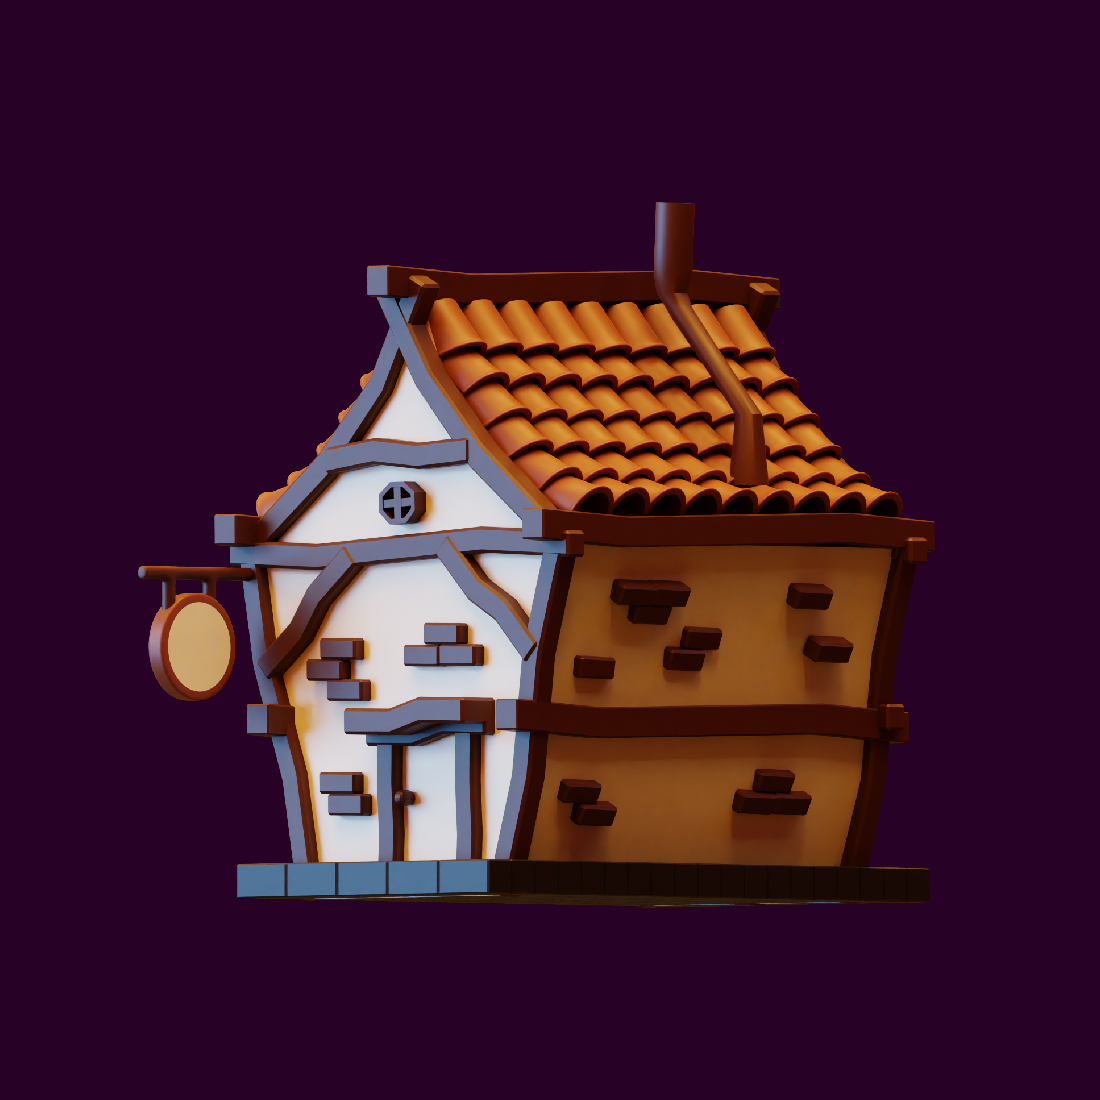 Paper model of a house on a purple background.